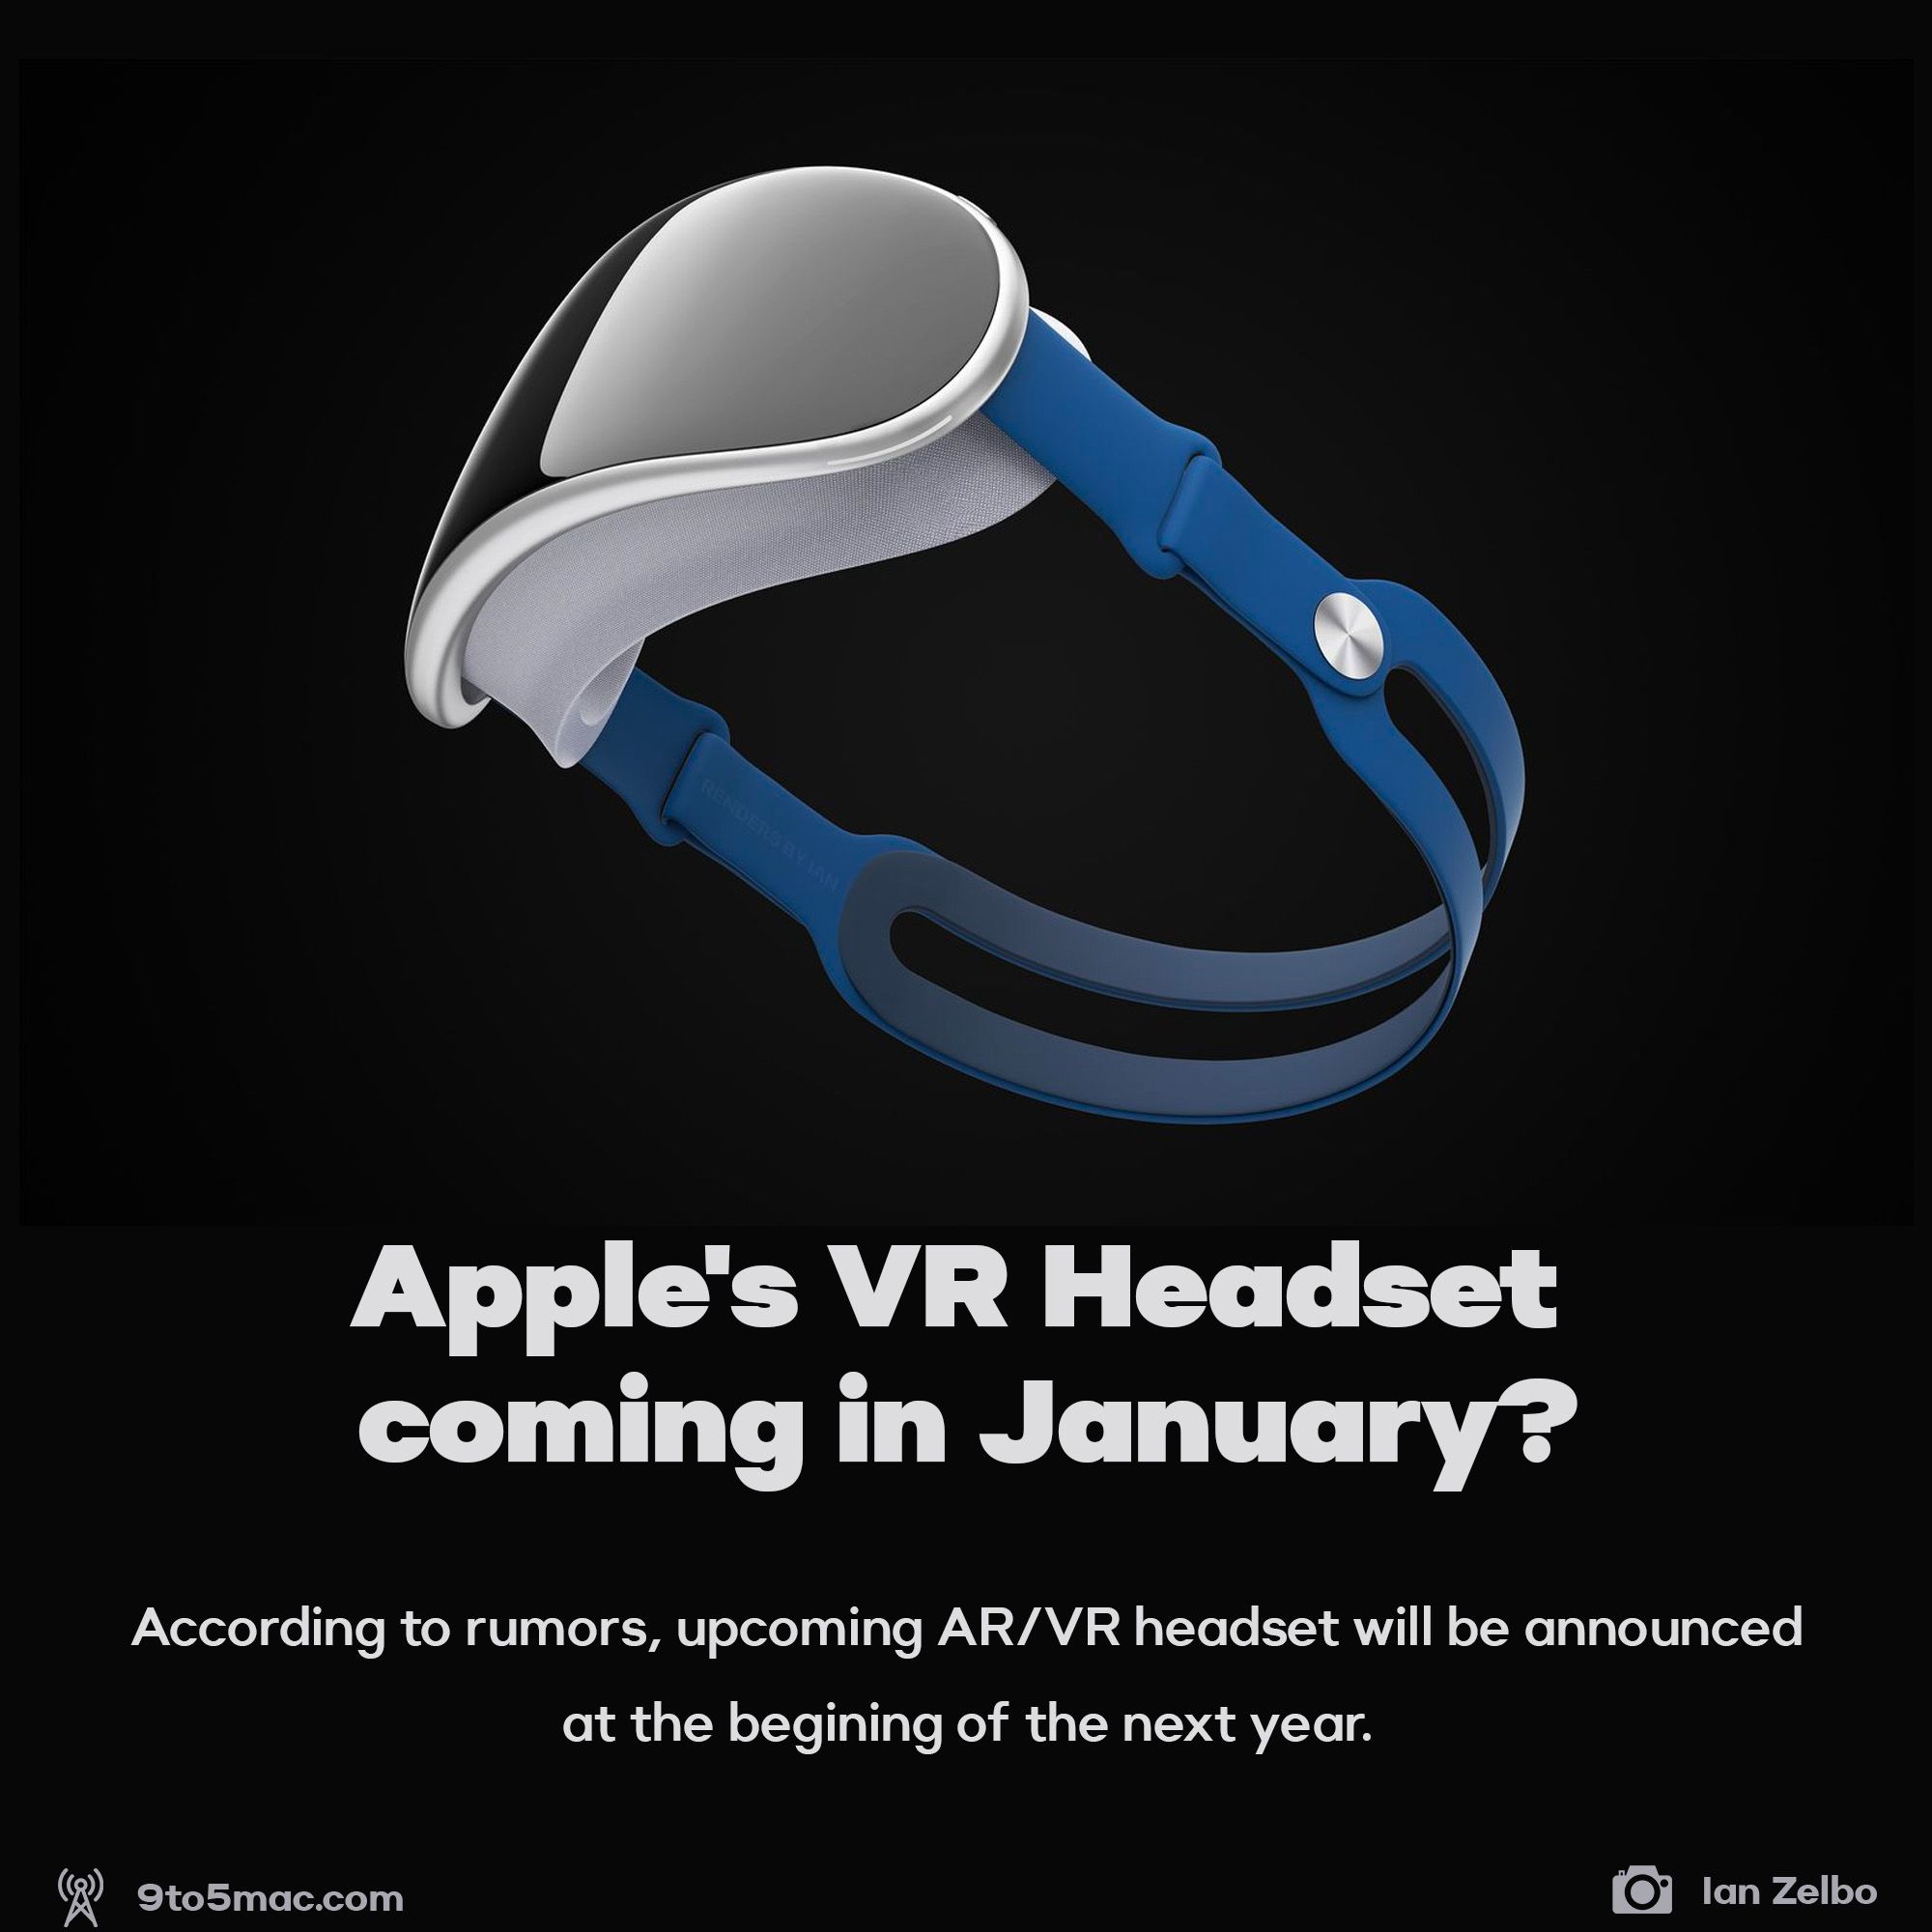 Apple AR/VR Headset coming in January